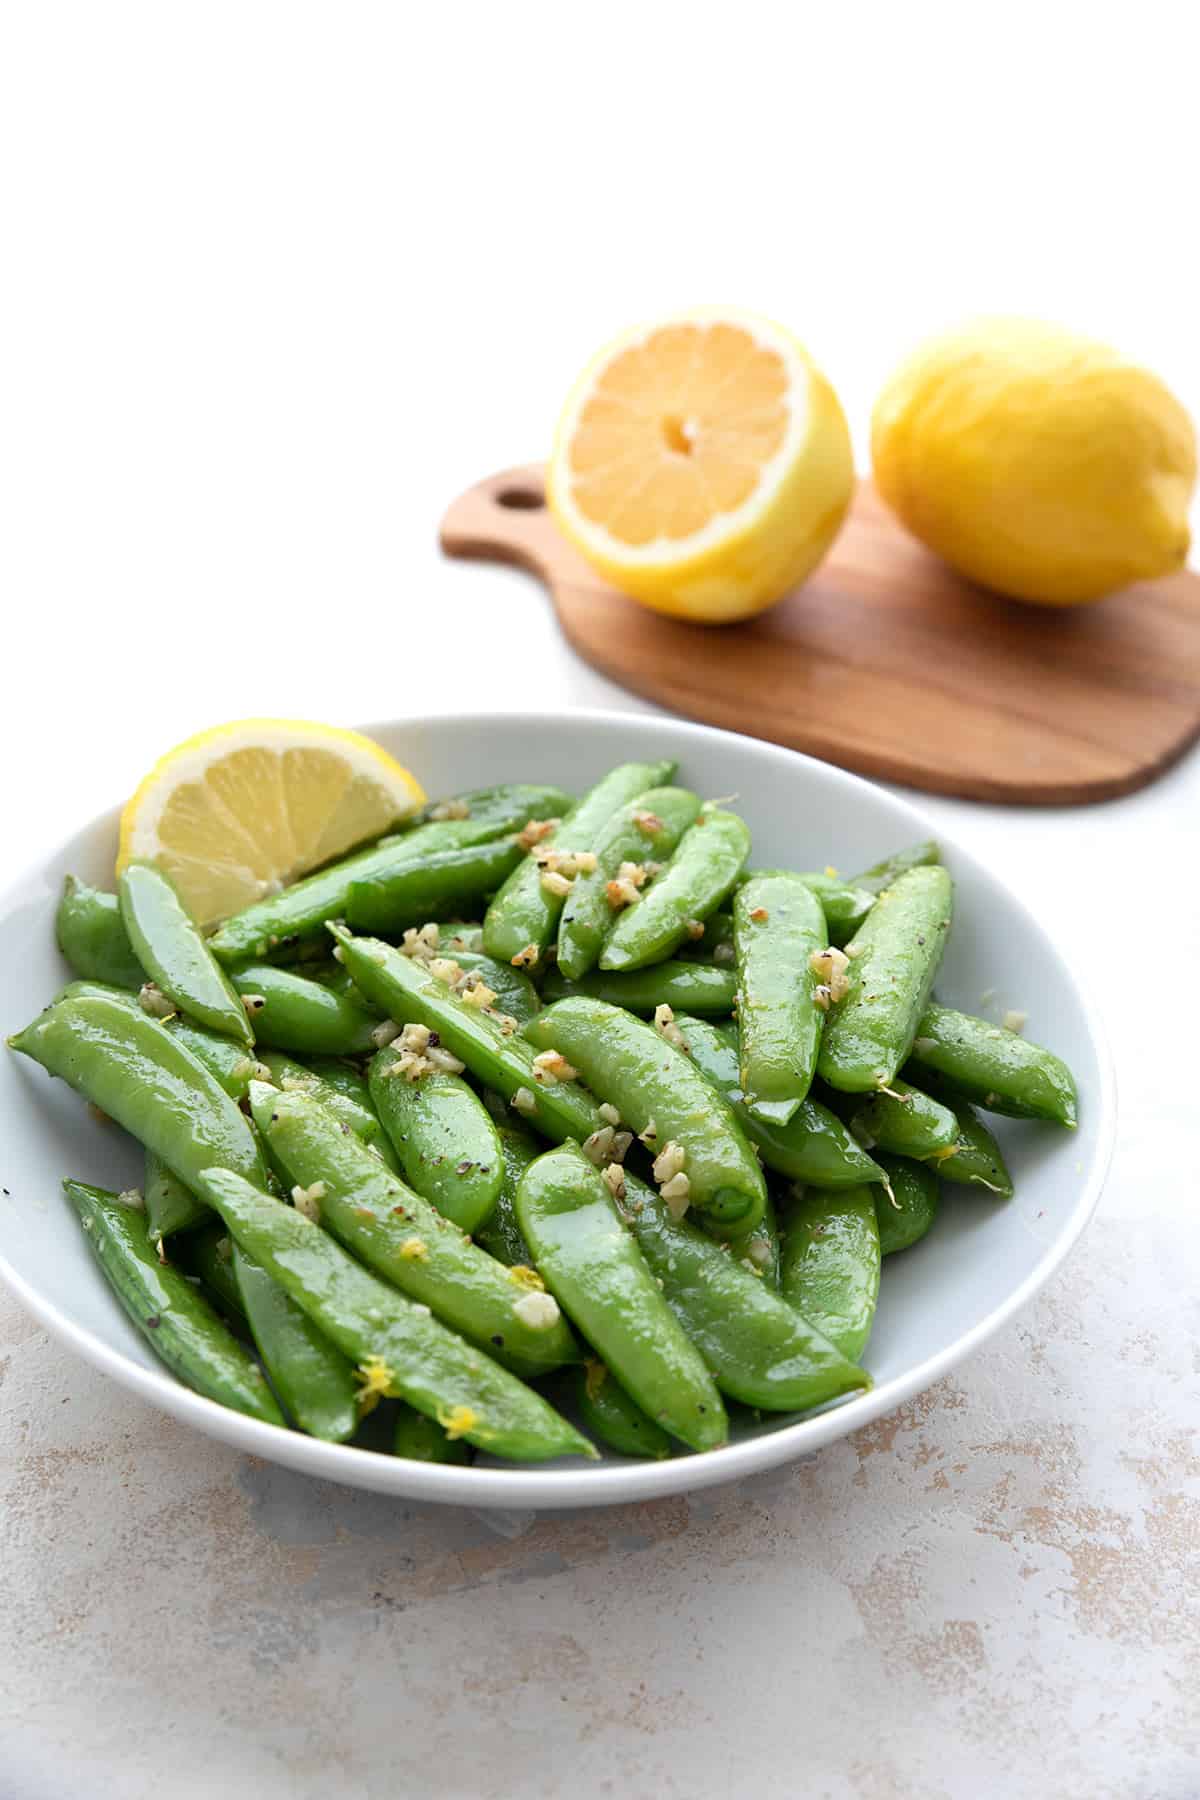 Sautéed sugar snap peas with lemon and garlic in a white serving dish.